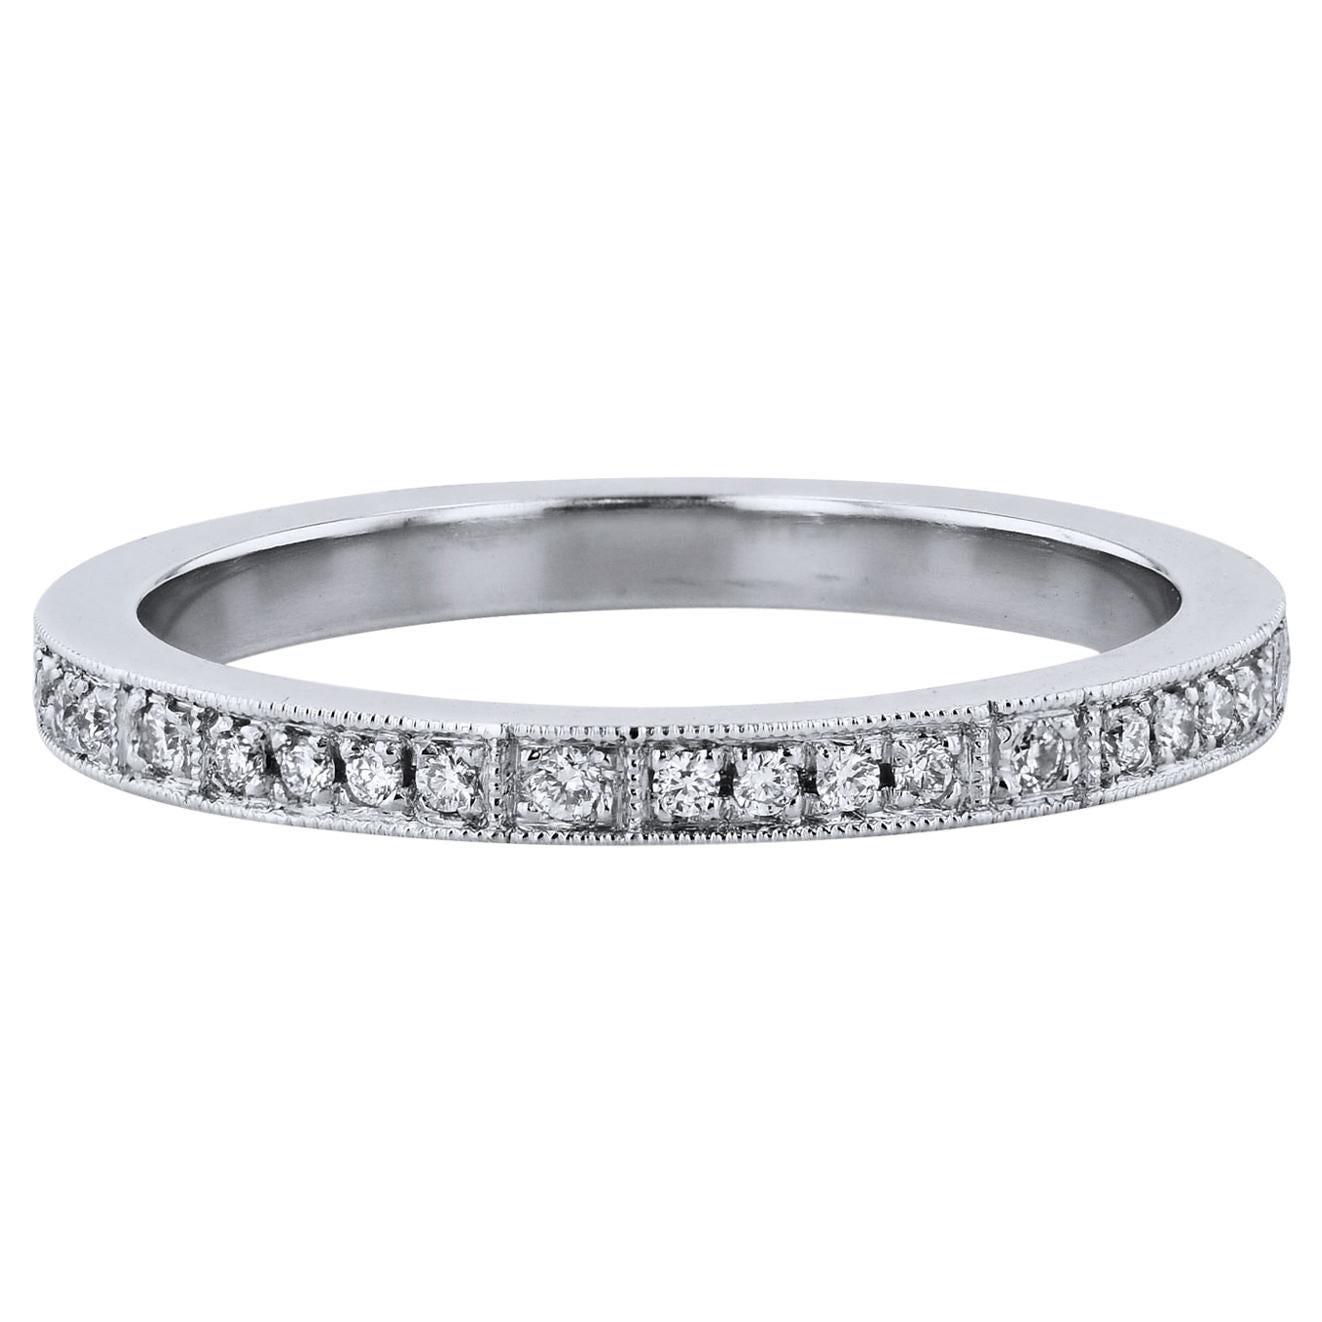 0.19 Carat Round Diamond Pave Platinum Eternity Band Ring Handmade by H&H Jewels For Sale